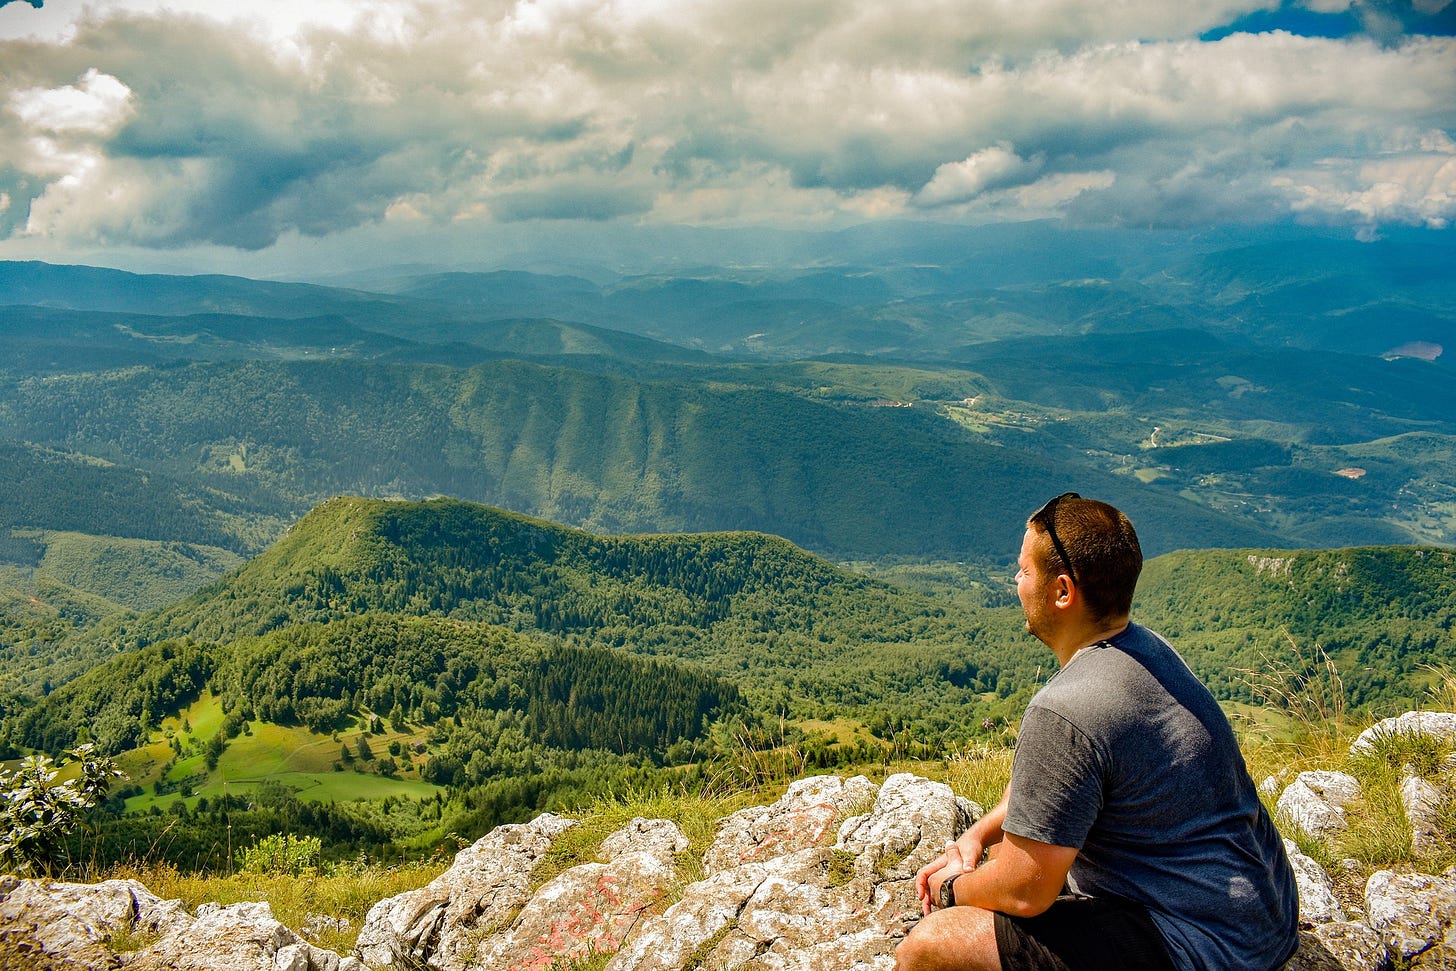 A man sits and looks over a vista of hills.